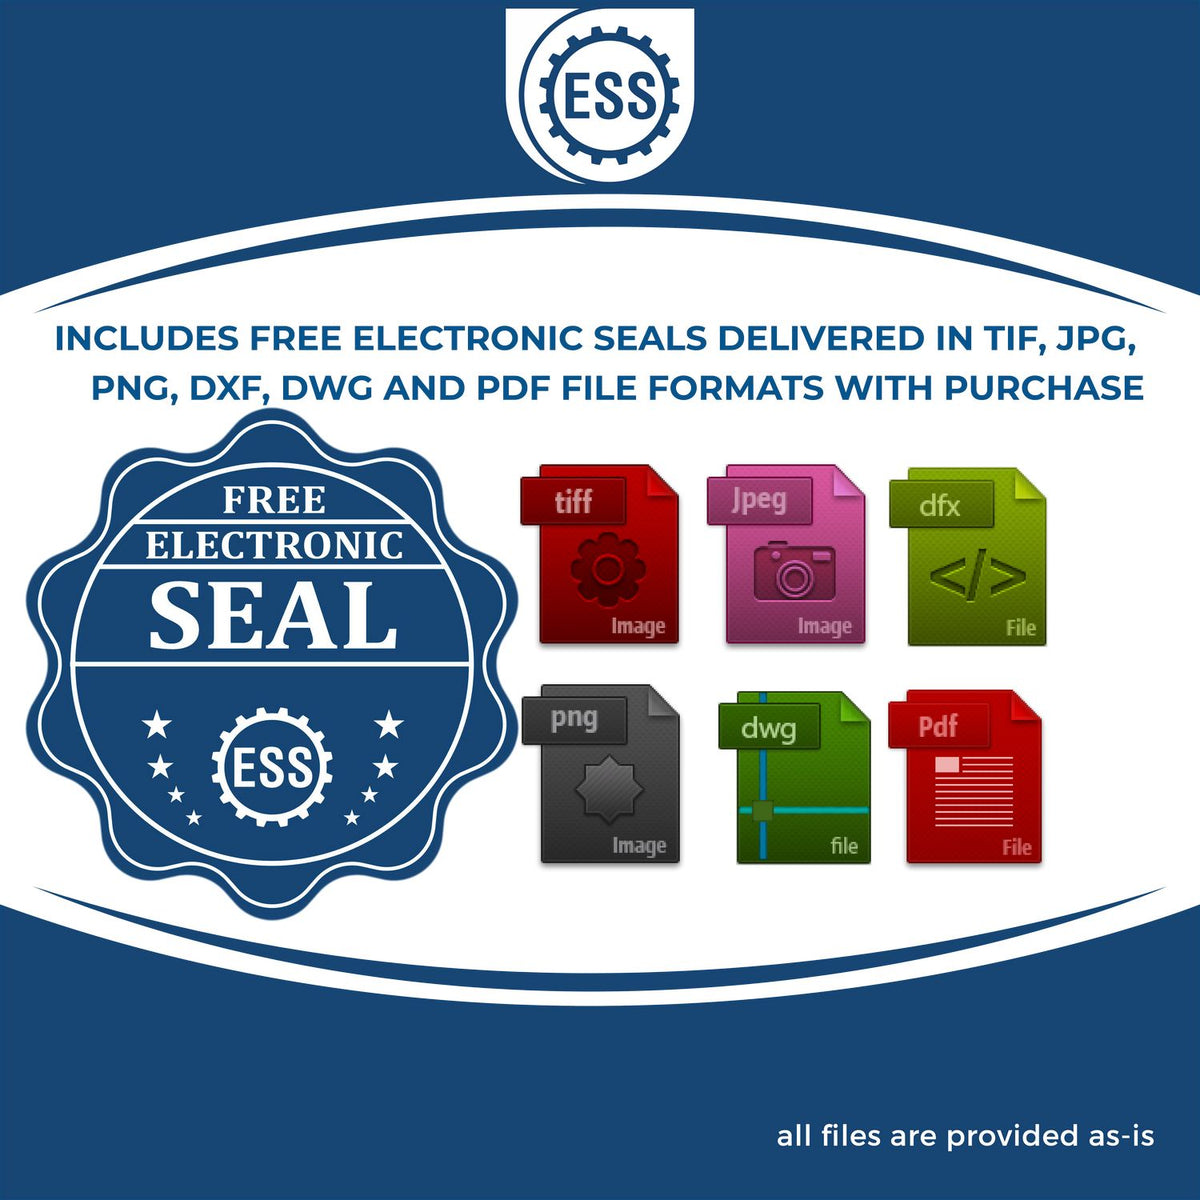 An infographic for the free electronic seal for the Soft Minnesota Professional Engineer Seal illustrating the different file type icons such as DXF, DWG, TIF, JPG and PNG.